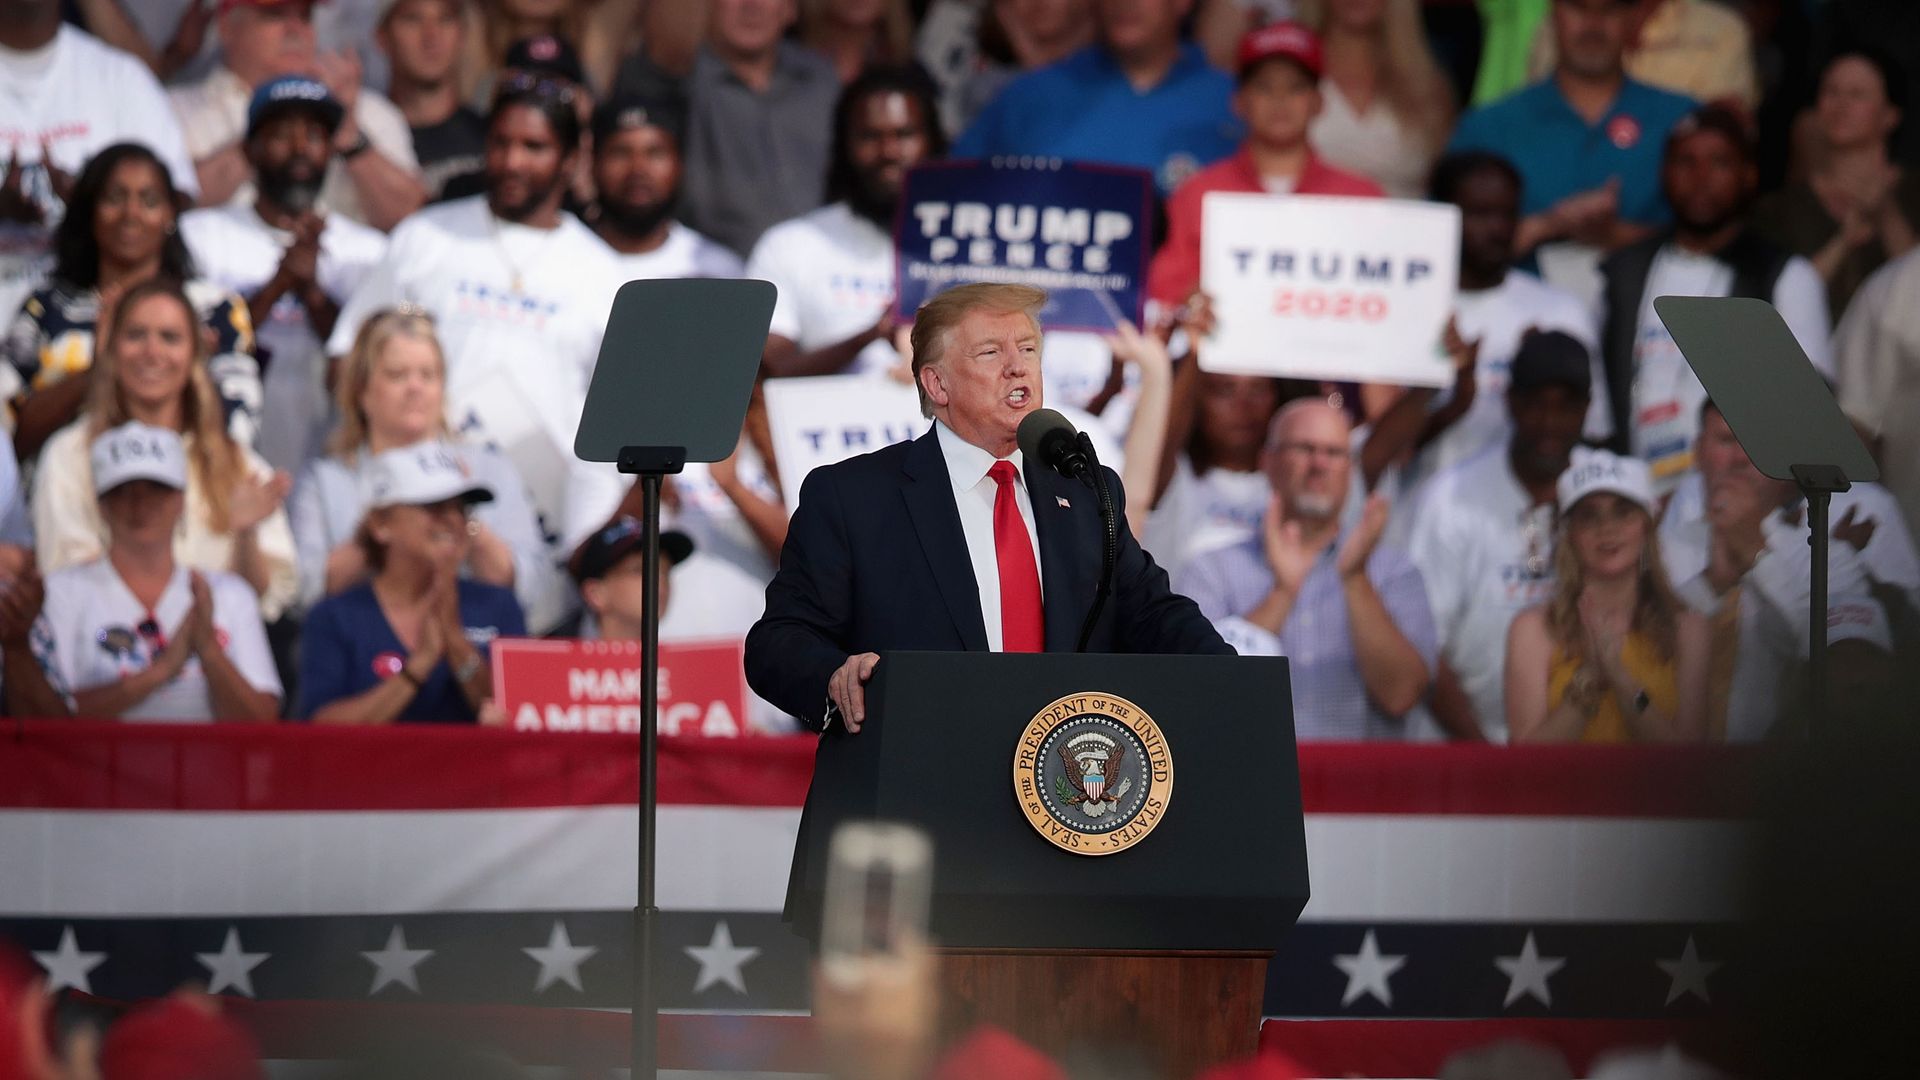   President Donald Trump speaks during a rally at the Aaron Bessant Amphitheater on May 8, 2019 in Panama City Beach, Florida. 